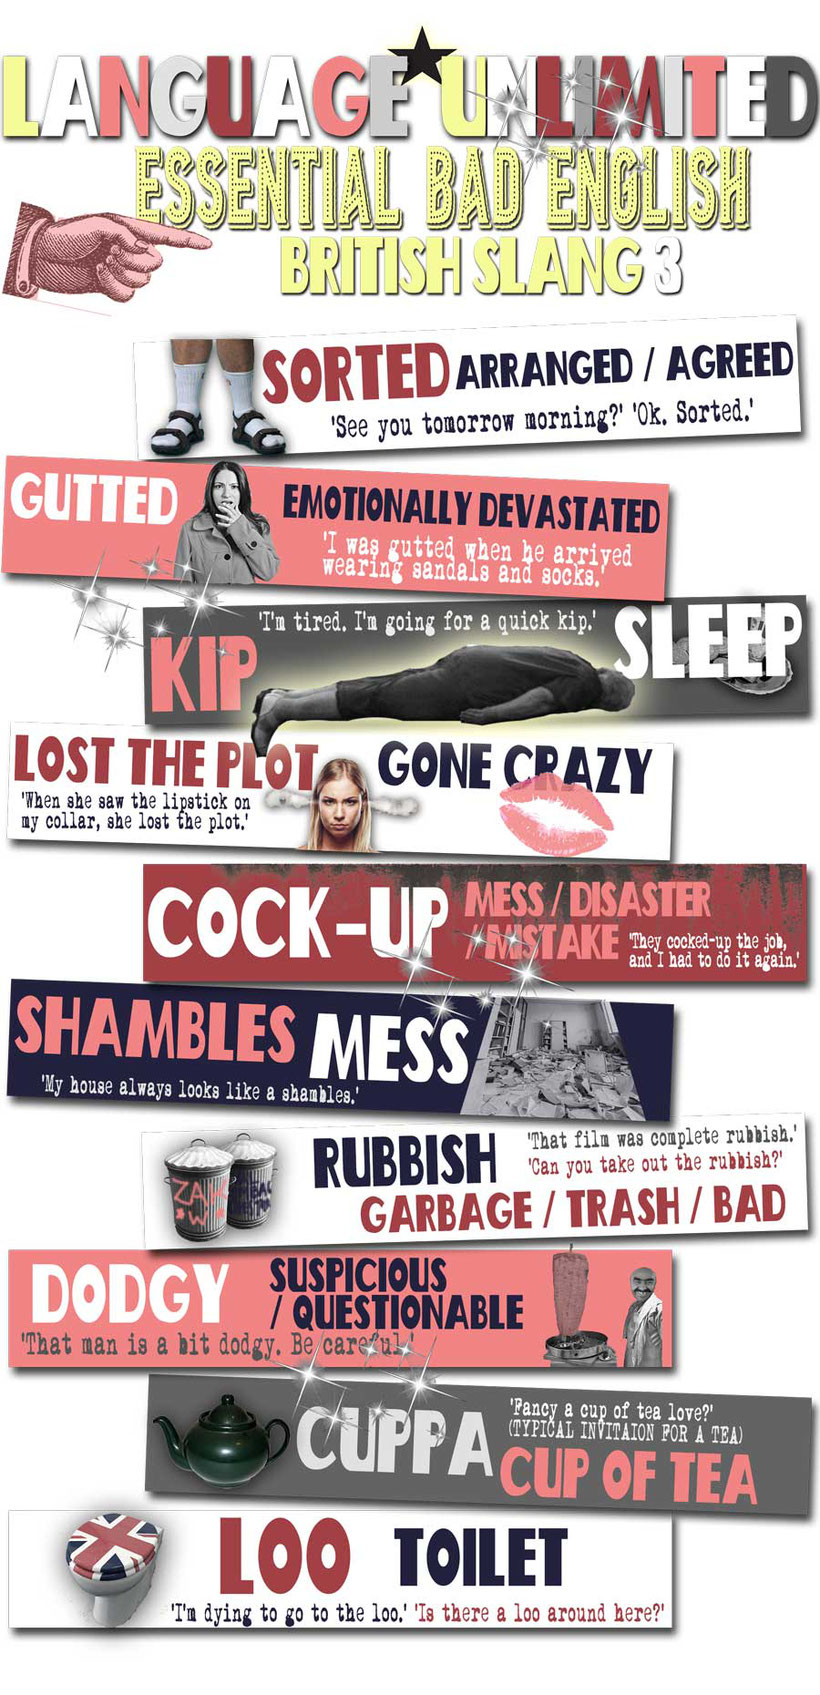 Essential bad English. British Slang 3. Infographic by Language Unlimited